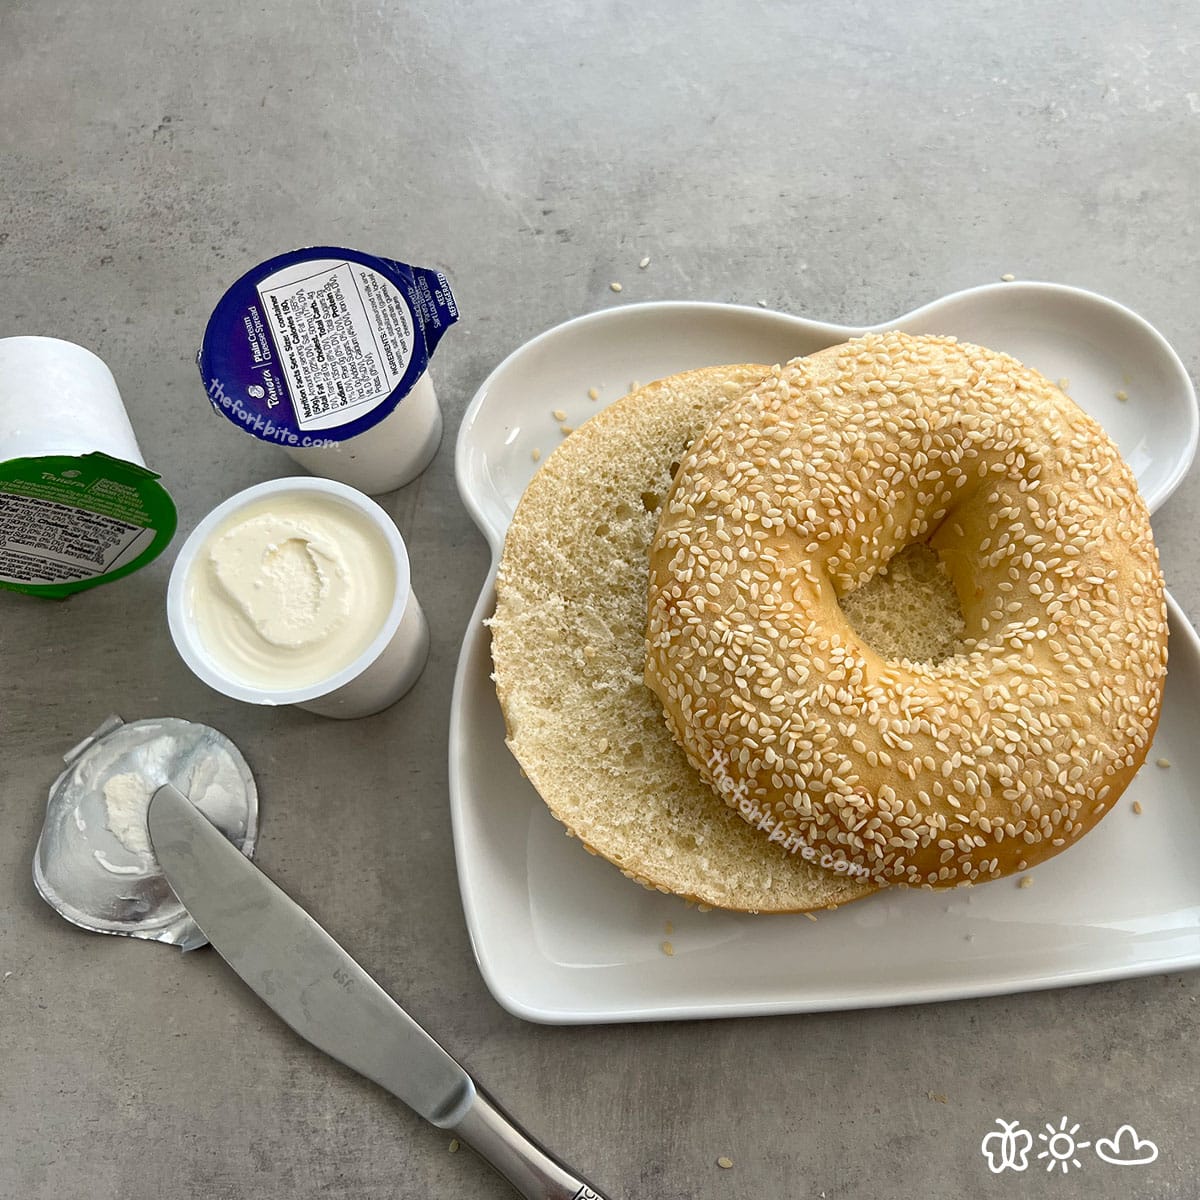 There are many different types of cream cheese on the market, and it can be confusing to know which one to choose. Cream cheese is also a subject of debate regarding spreadability.